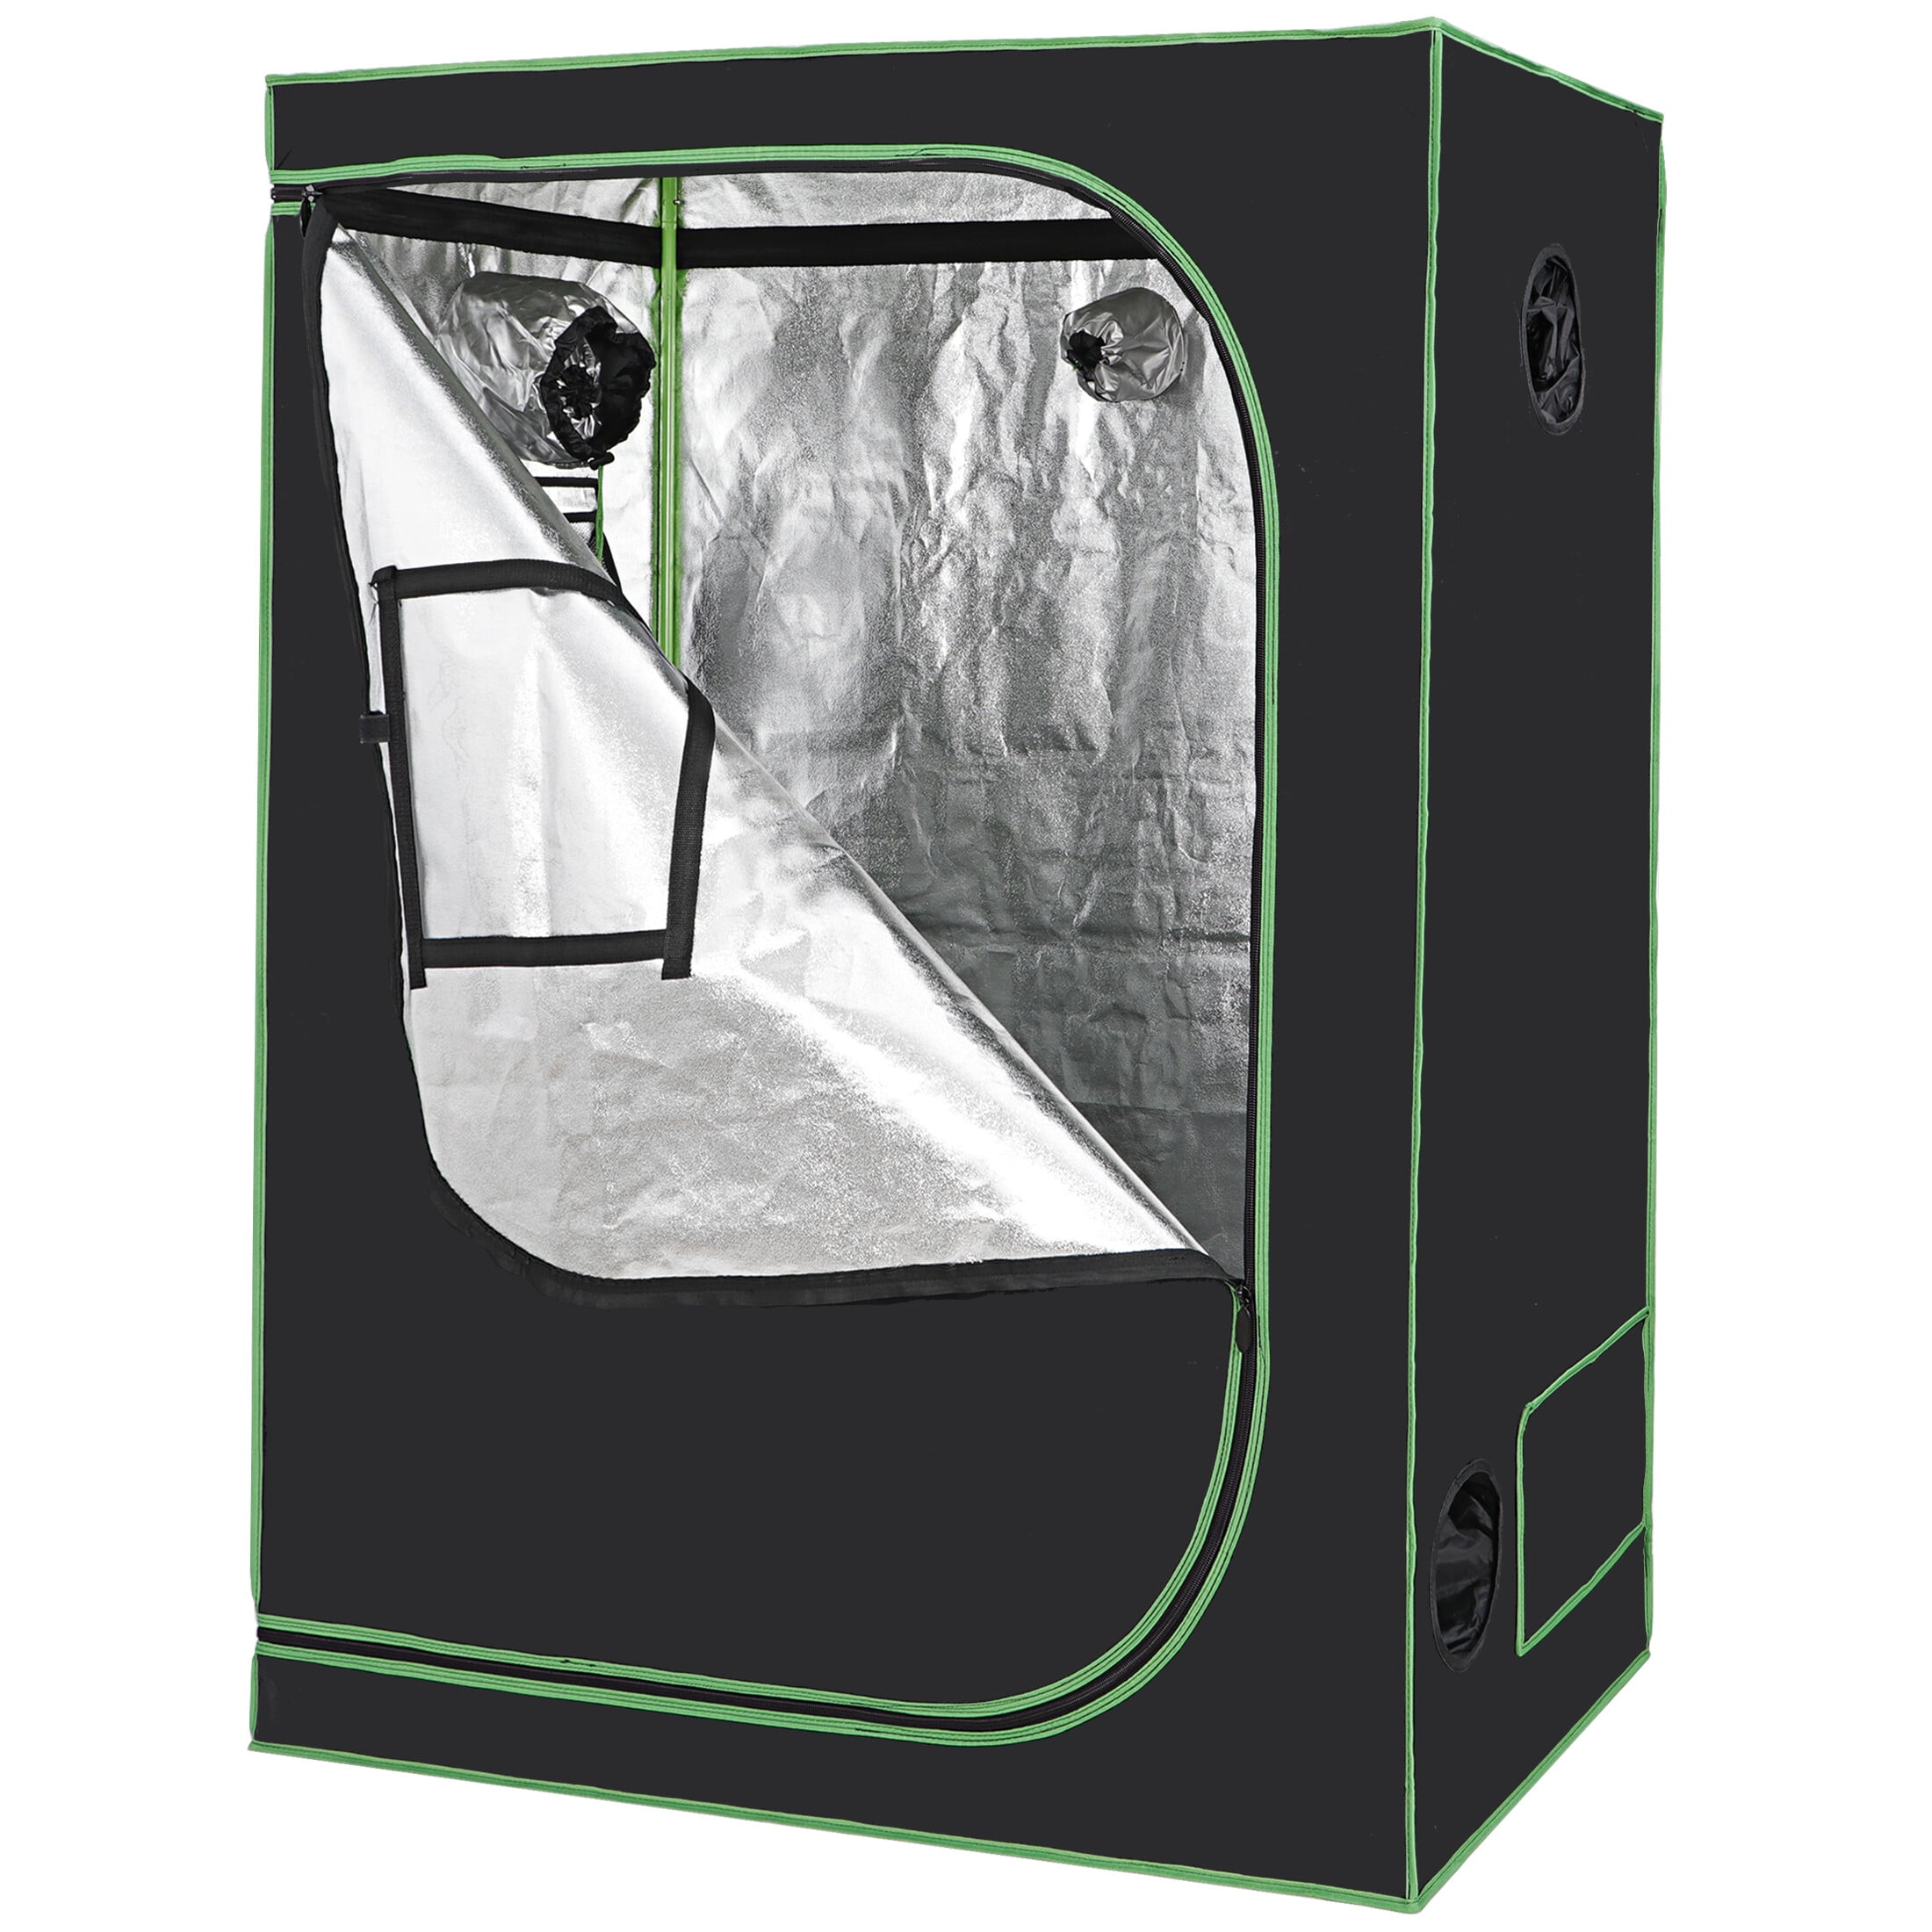 24""x48""x60" Hydroponic Grow Tent with Observation Window and Floor Tray Indoor